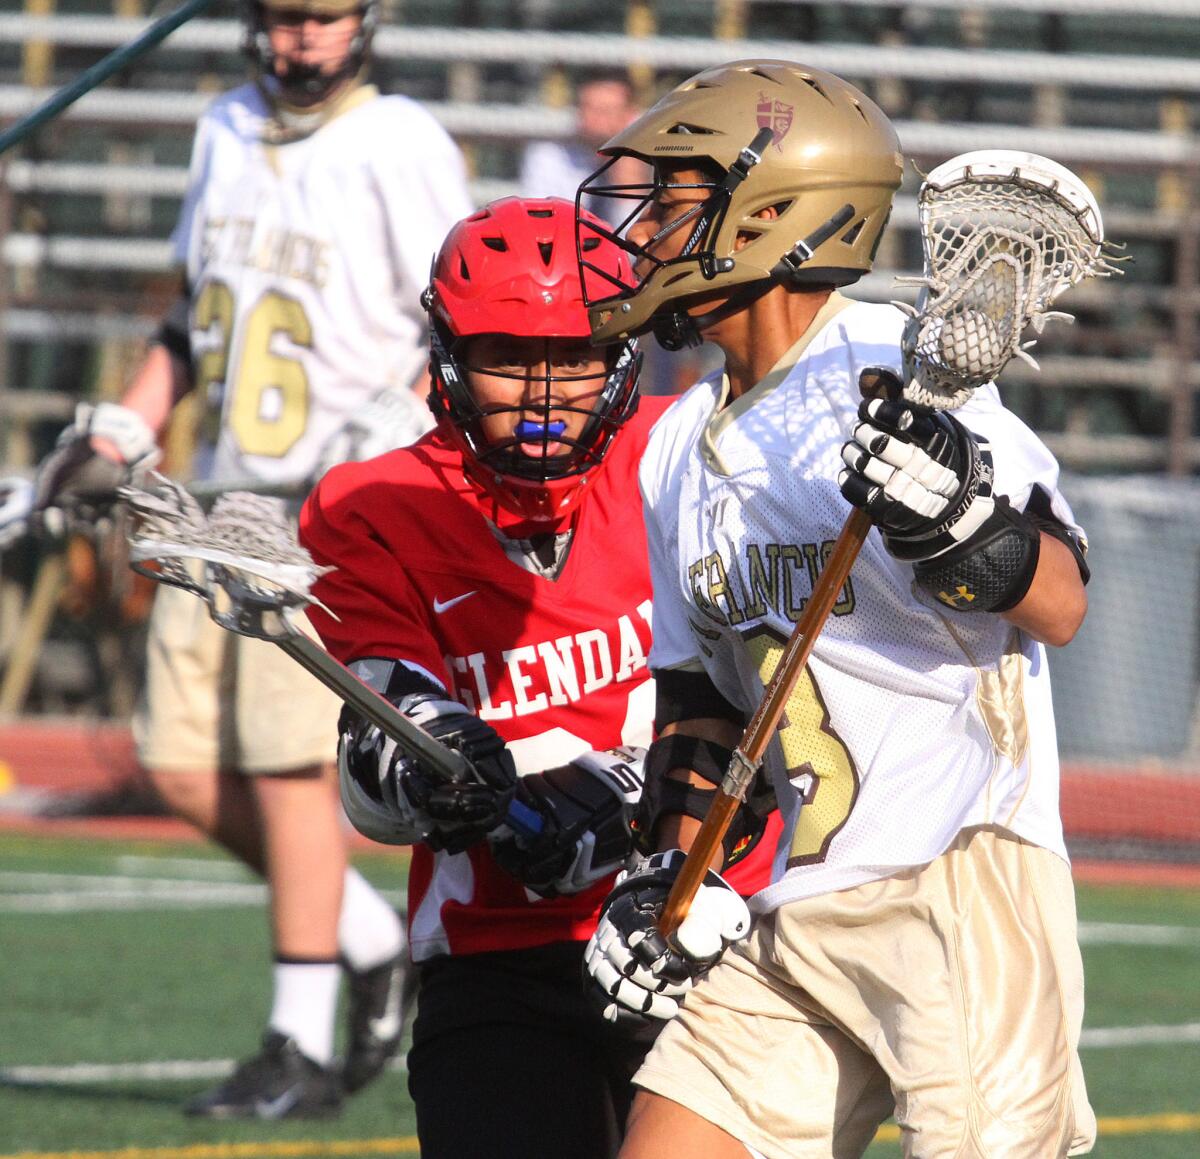 St. Francis attacker Evan Swayne runs for a position to pass against Glendale High's Jesus Chavez on Thursday, March 27, 2014.